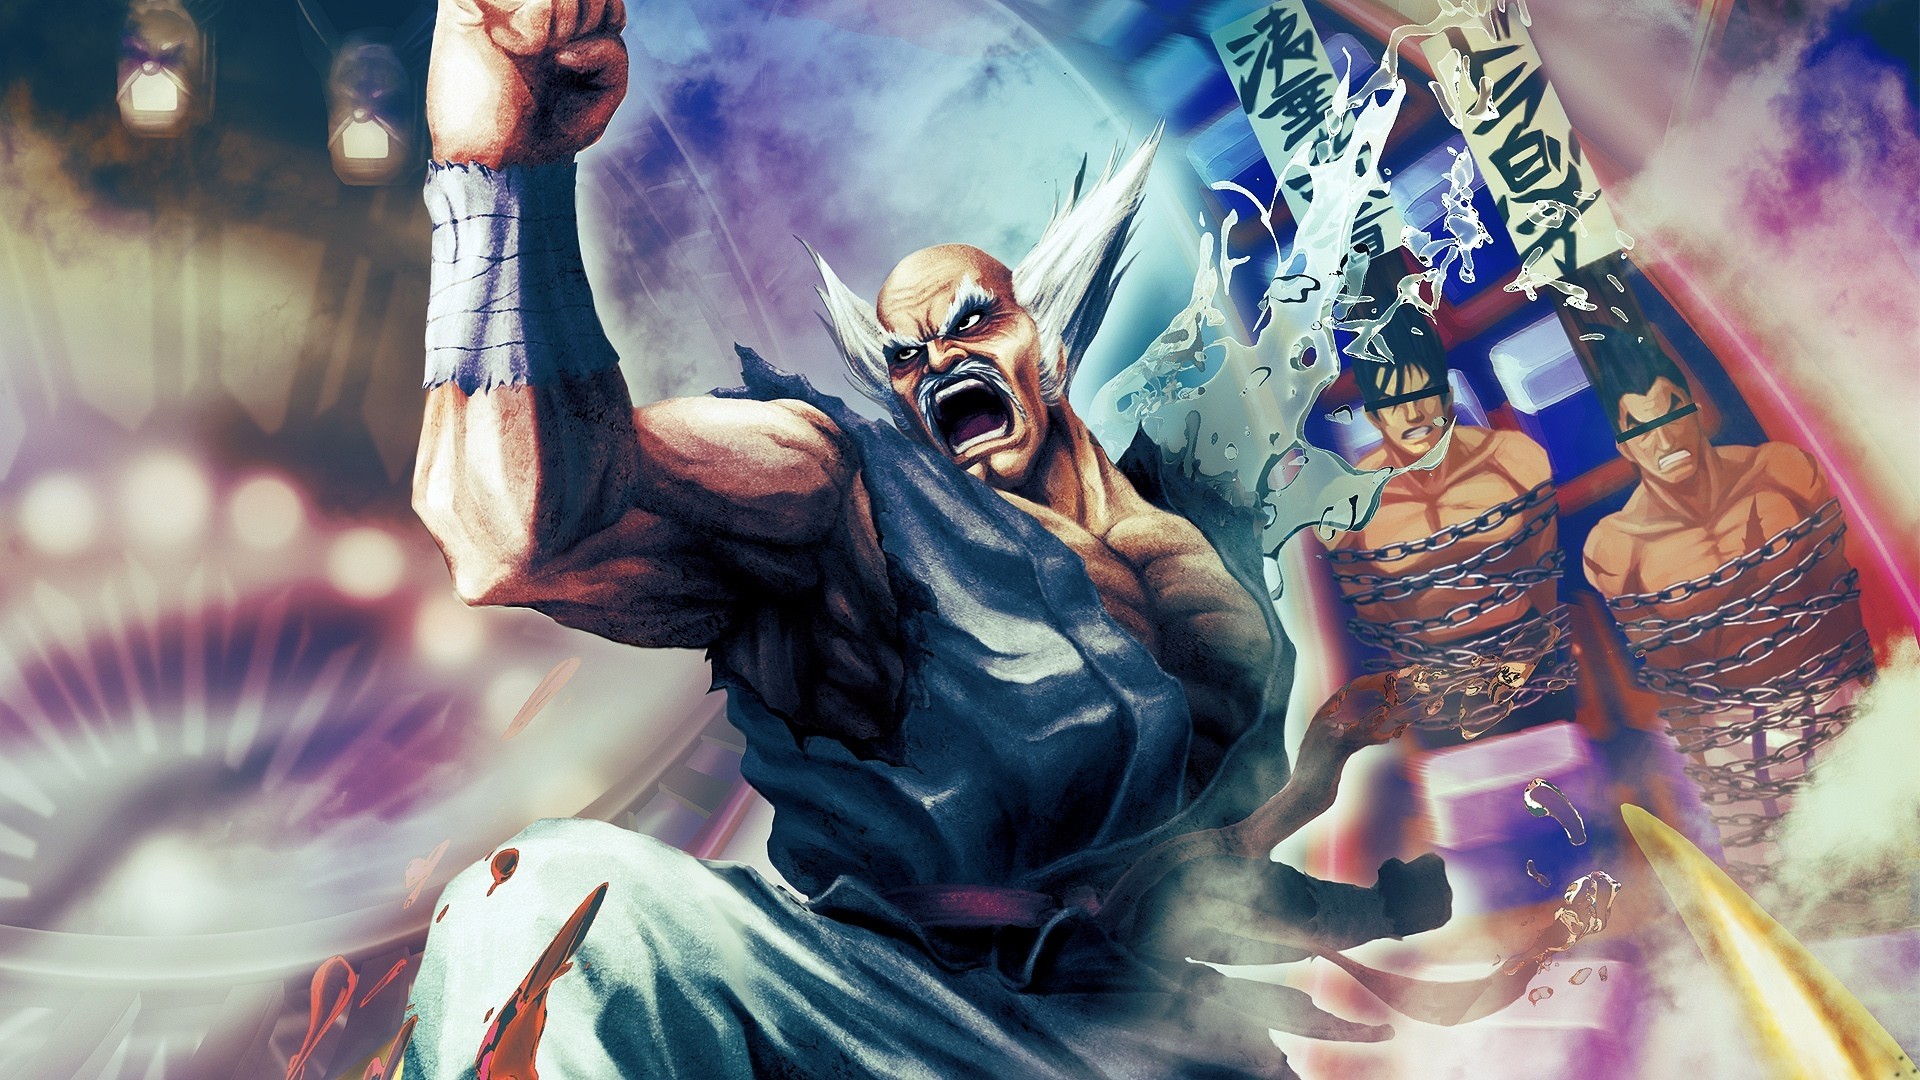 1920x1080 Wallpaper Street fighter x tekken, Angry, Fighter, Hand HD, Picture, Image